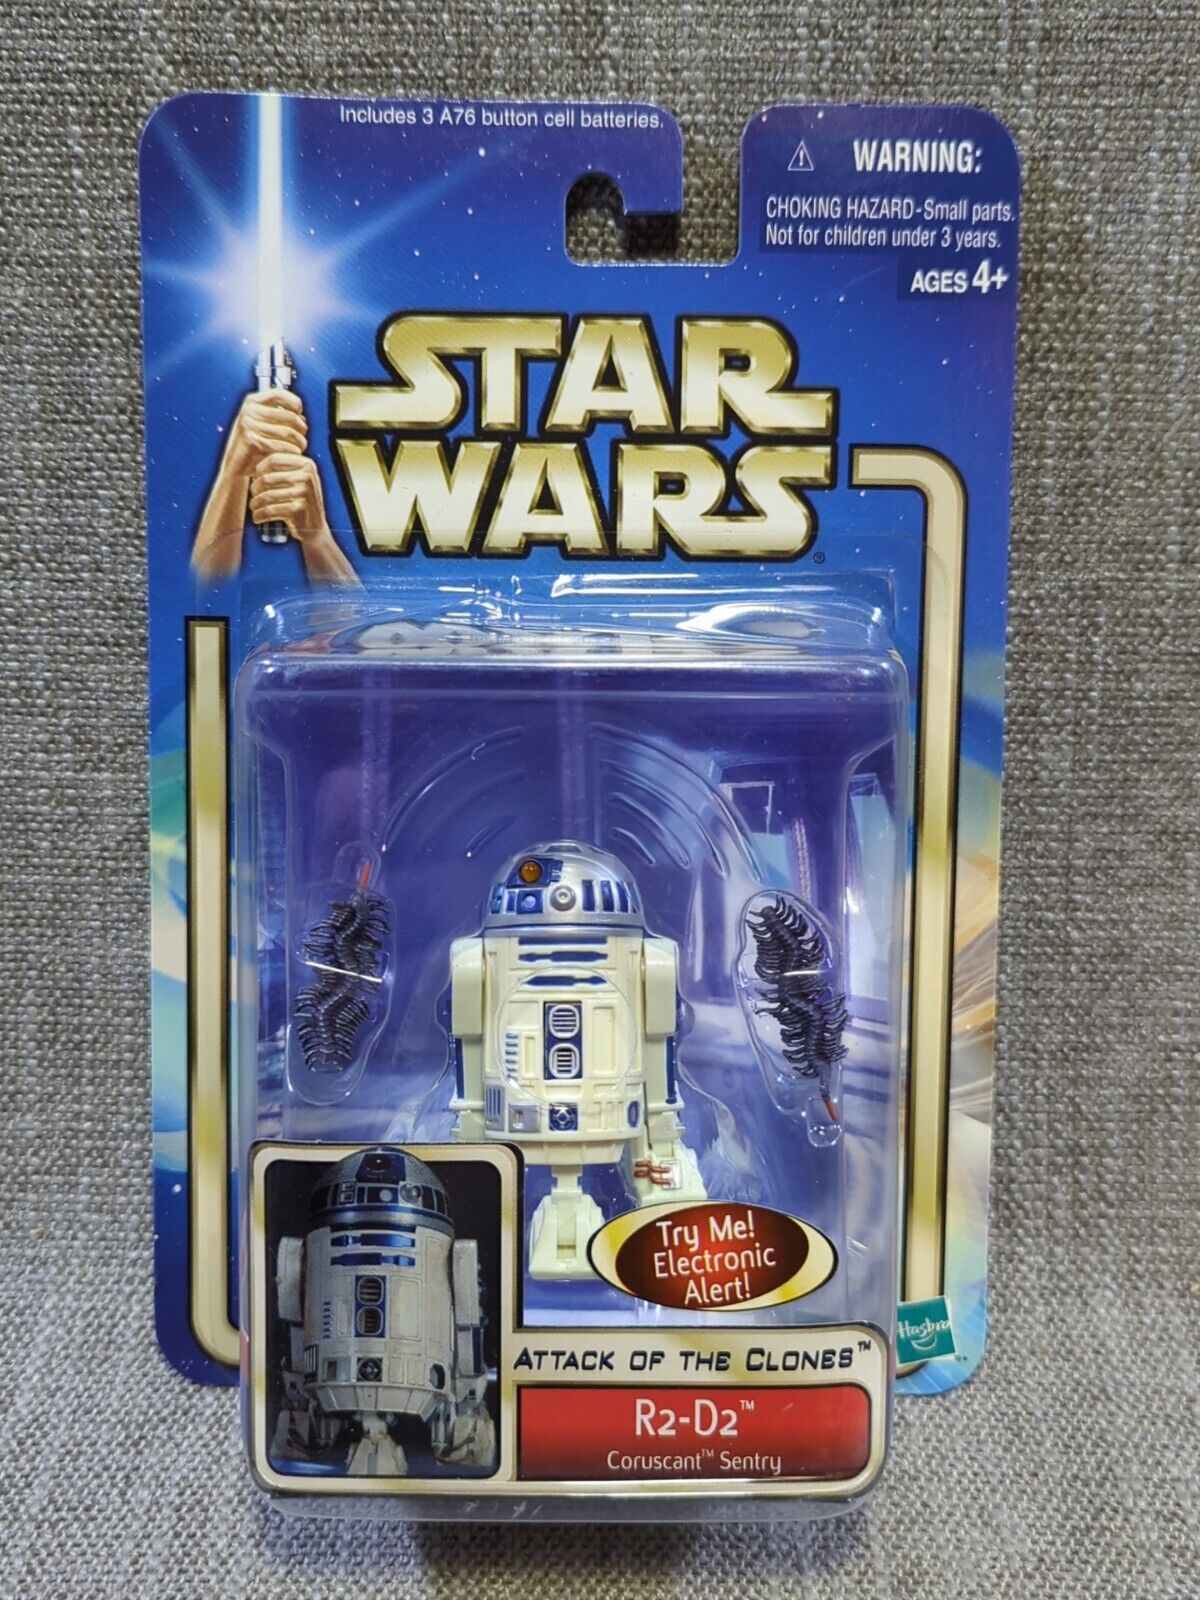 Star Wars Attack Of The Clones #14 R2-D2 Coruscant Sentry Hasbro 2002 New